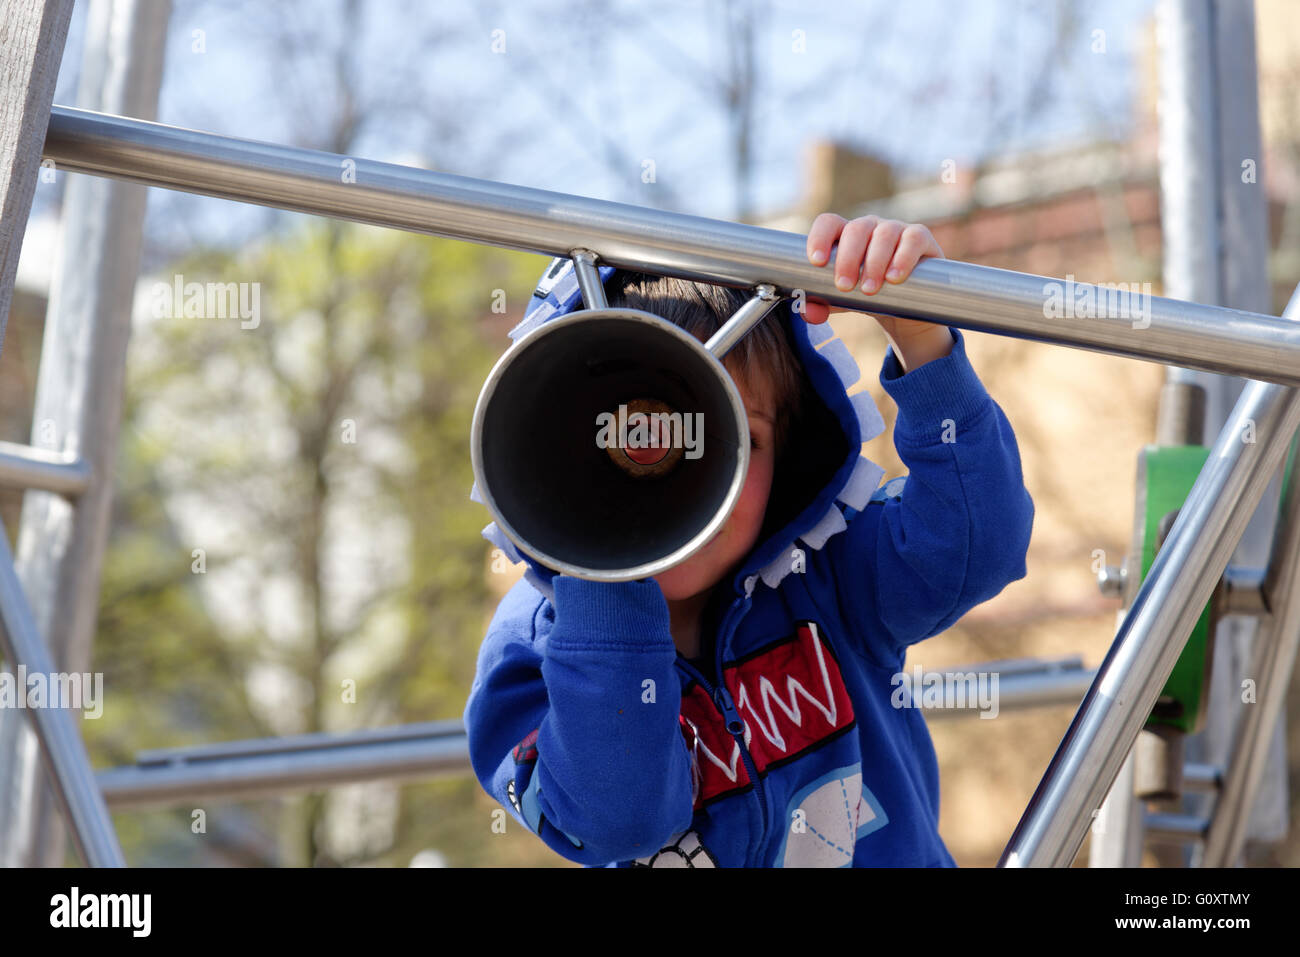 A young boy (4 years old) looking through a play telescope Stock Photo